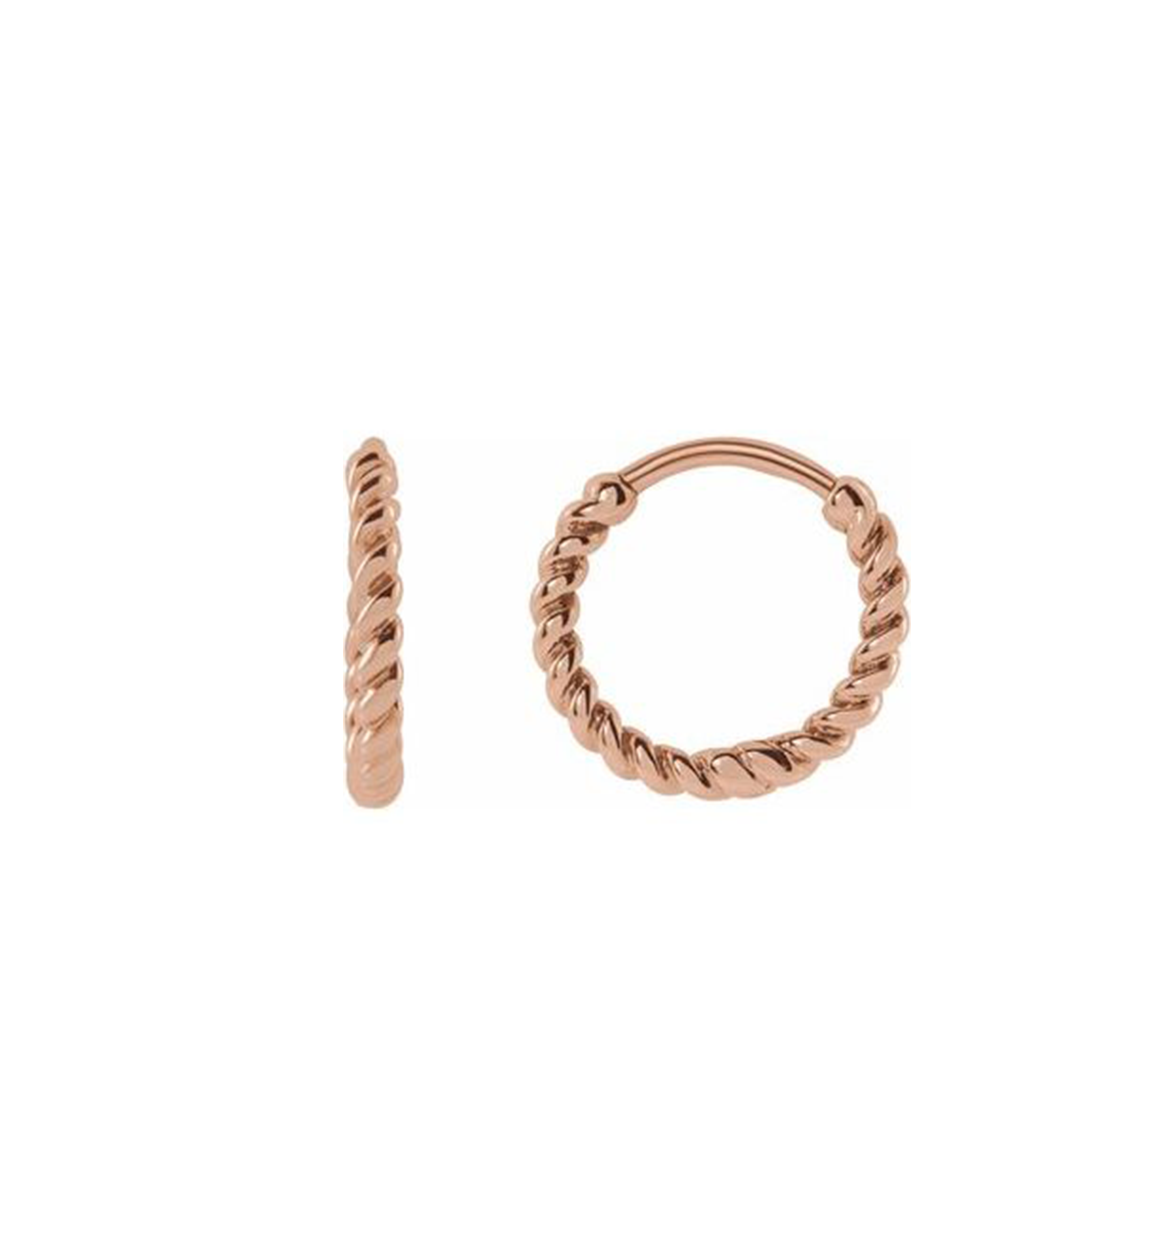 11MM BRAIDED 14K SOLID GOLD HUGGIE